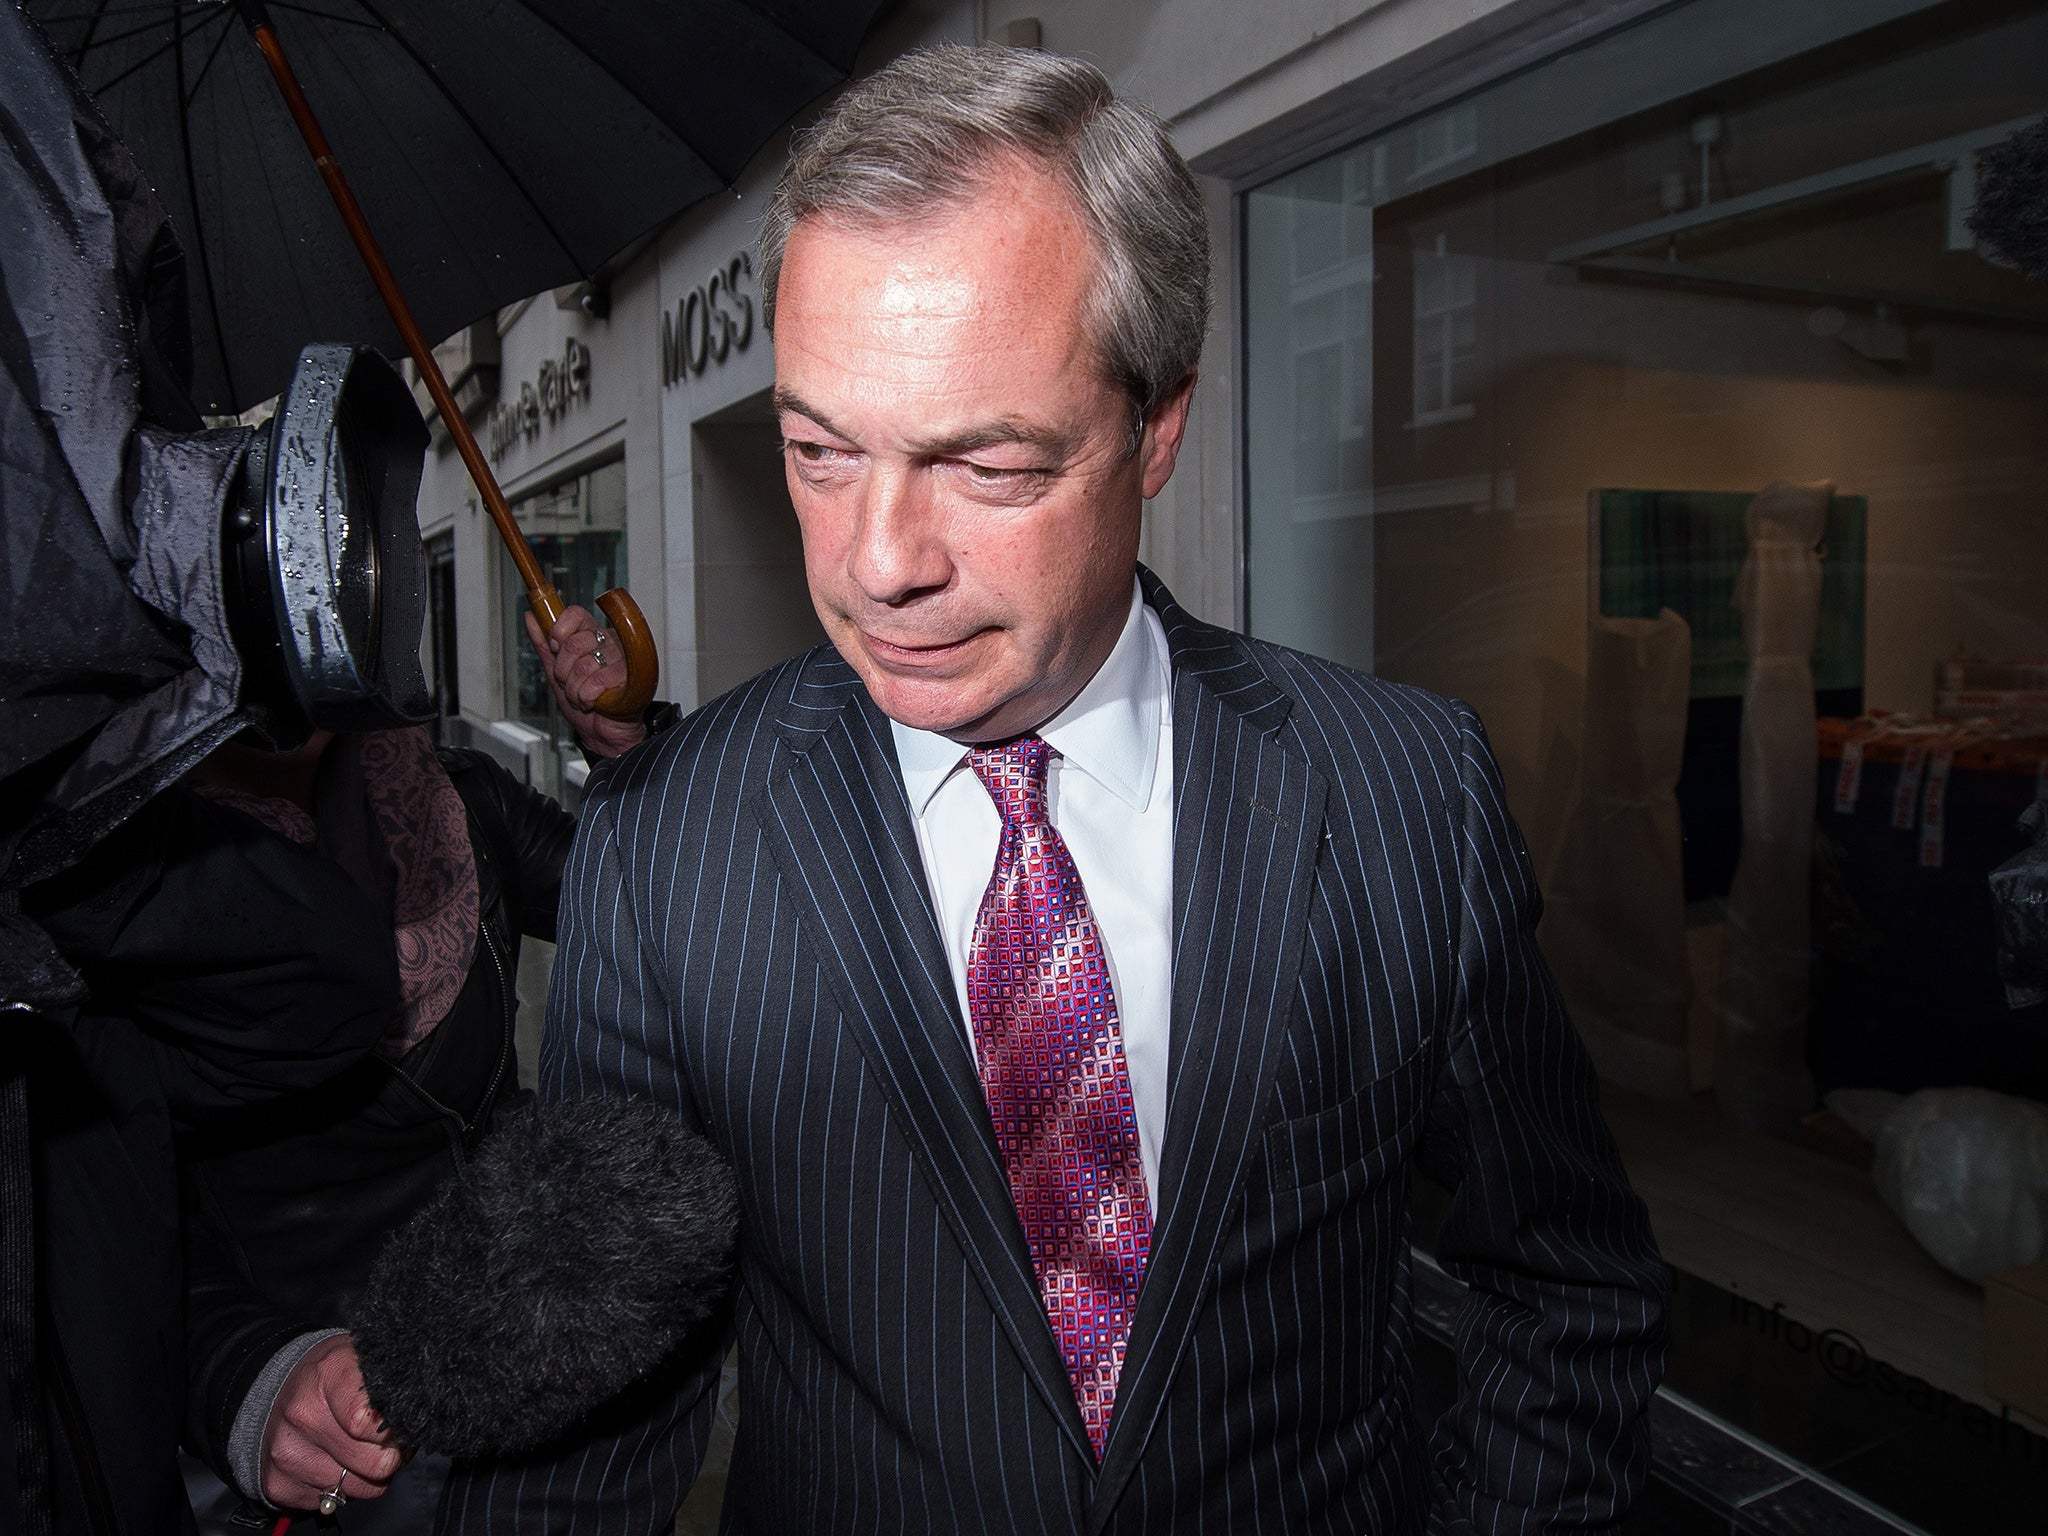 Farage loyalists havet issued declarations of support for him